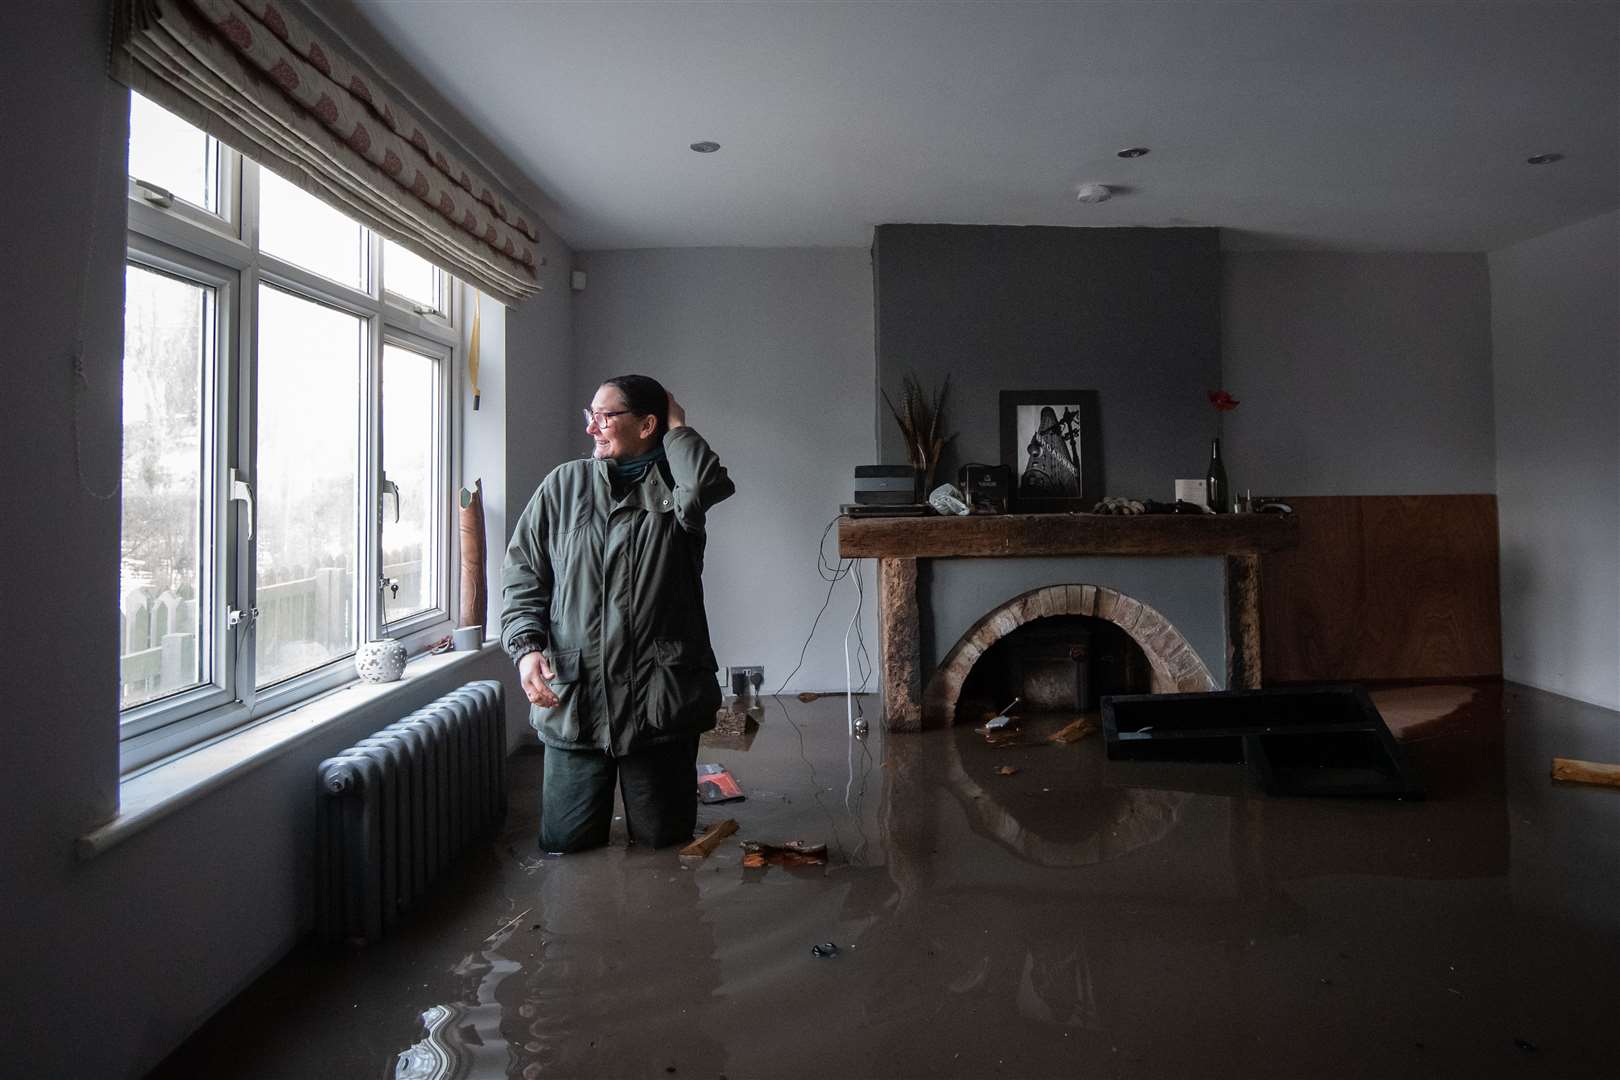 Gabrielle Burns-Smith looks out from her flooded home on the outskirts of Lymm in Cheshire (Joe Giddens/PA)